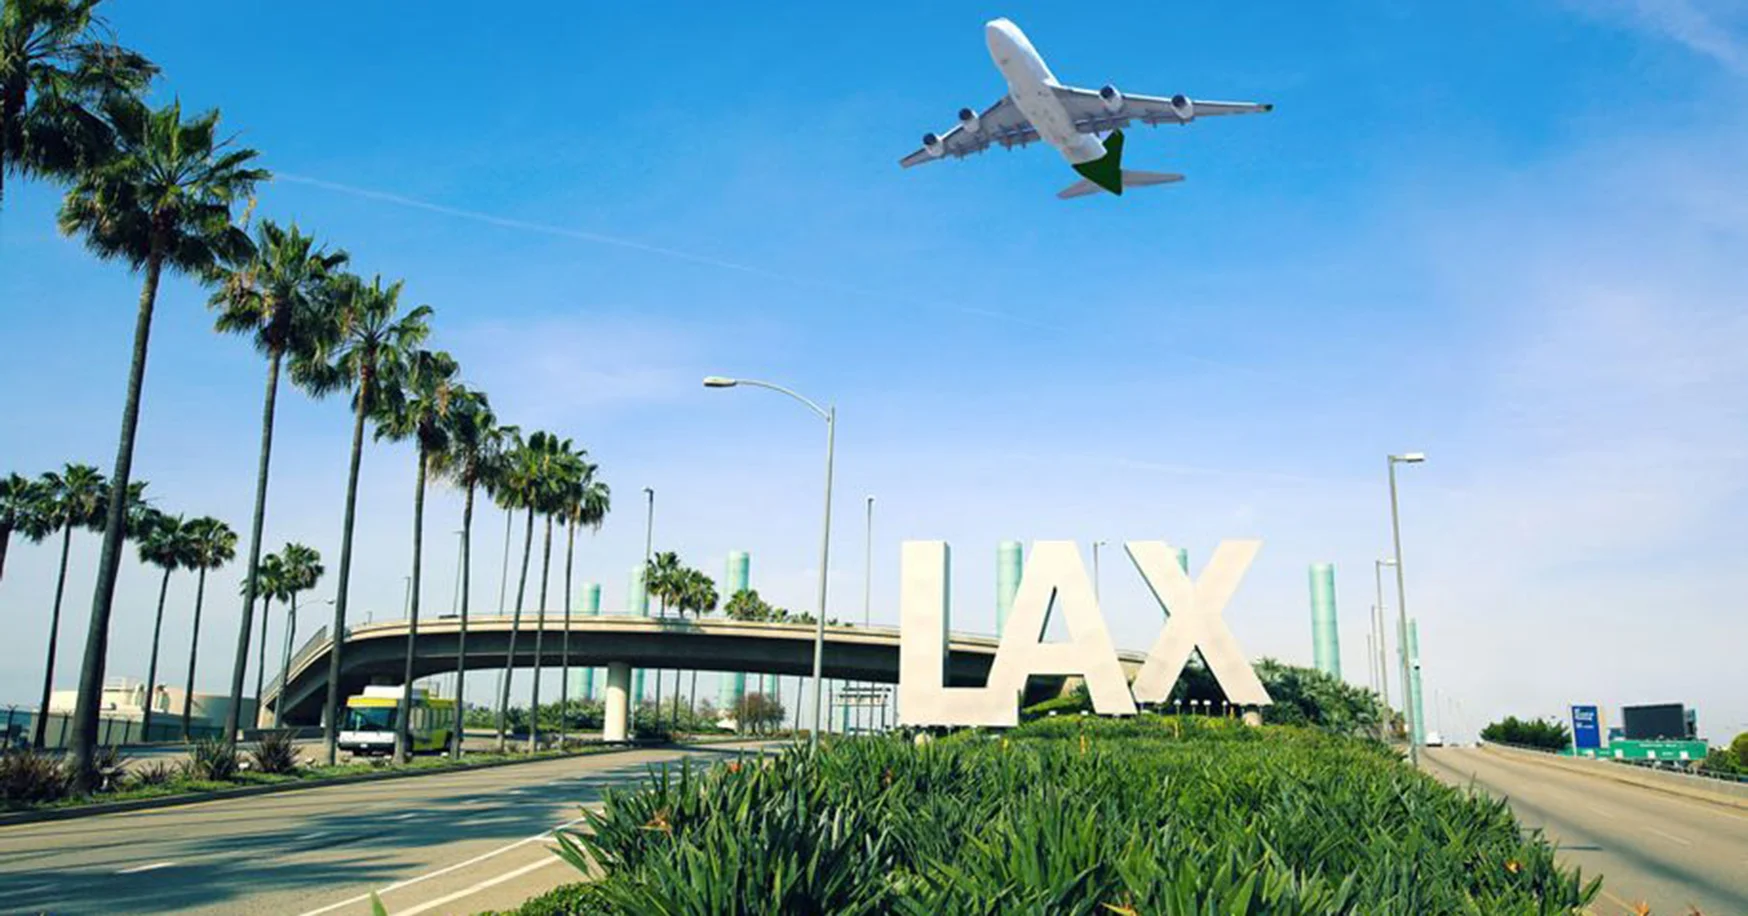 Lax Airport